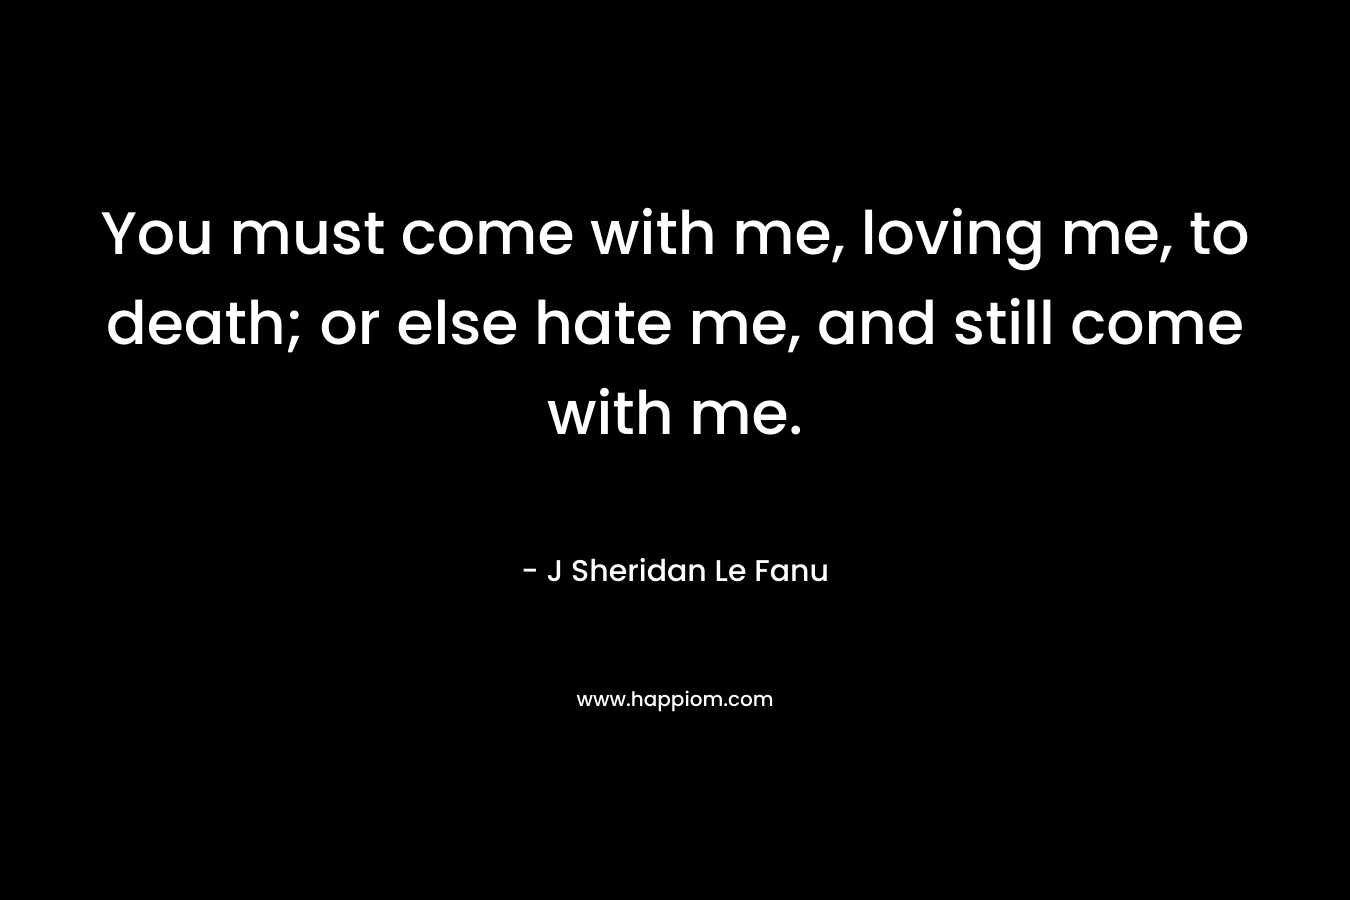 You must come with me, loving me, to death; or else hate me, and still come with me.